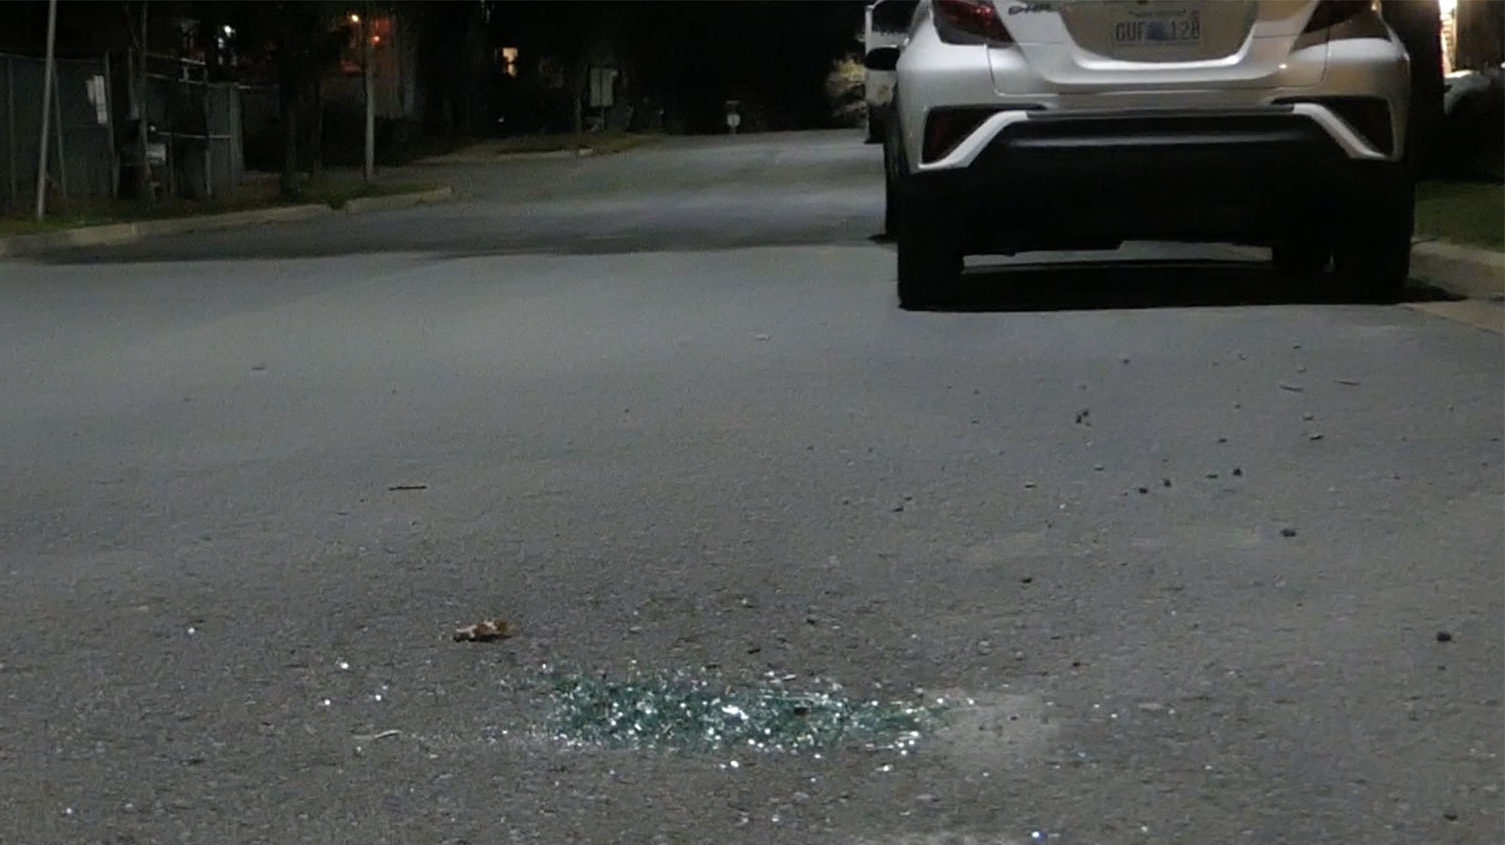 Broken glass outside of a car on the street.